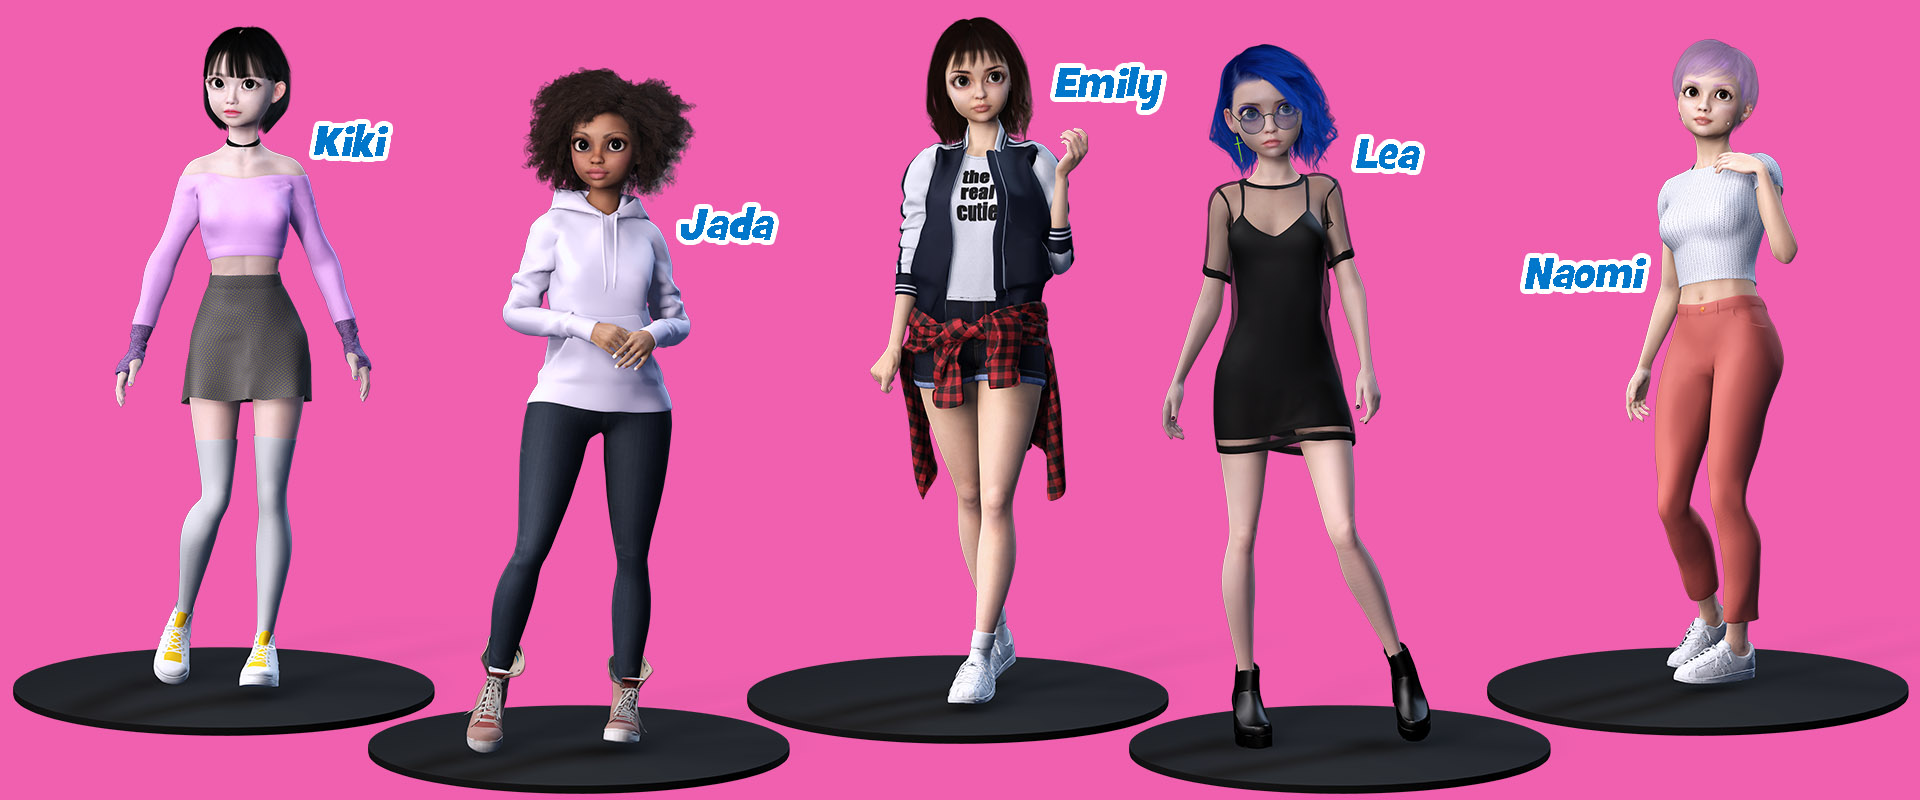 doll character-body shapes in clothes